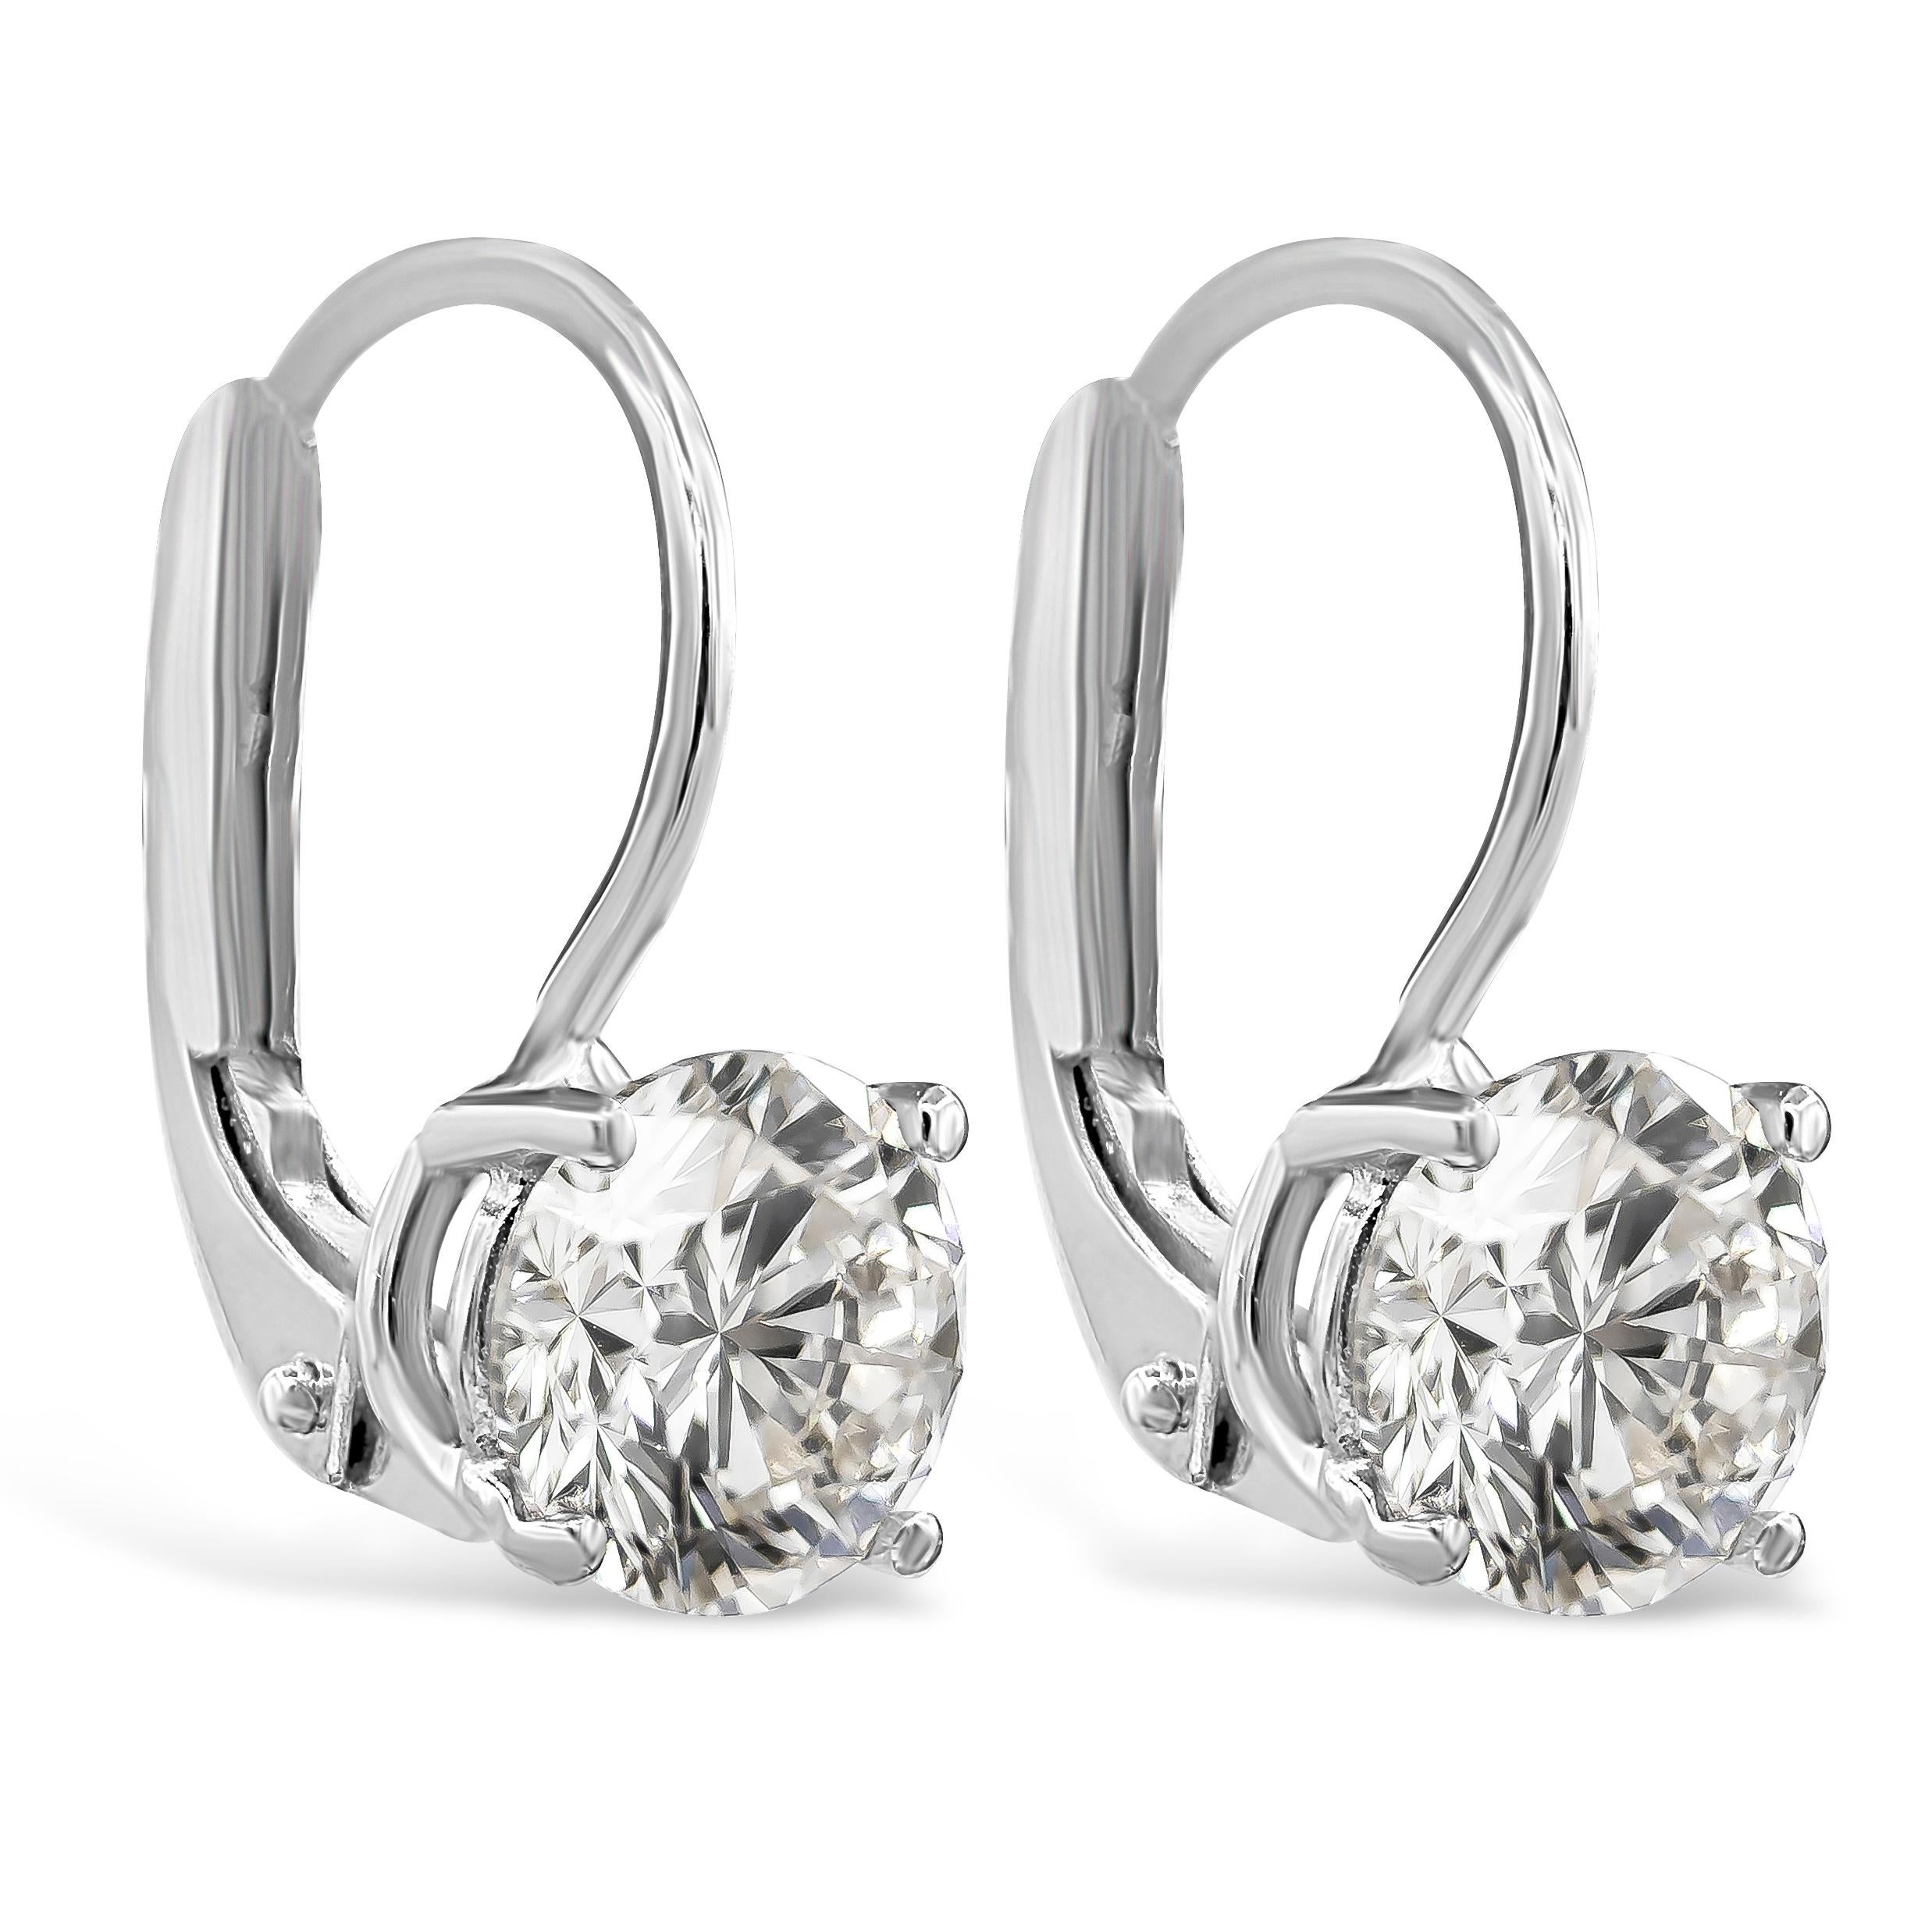 Showcasing 1.76 carats total two round brilliant diamonds, EGL Certified as K - L color and VS1 - VS2 in clarity. Elegantly set in a lever-back drop setting made in 14K white gold. 

Roman Malakov is a custom house, specializing in creating anything